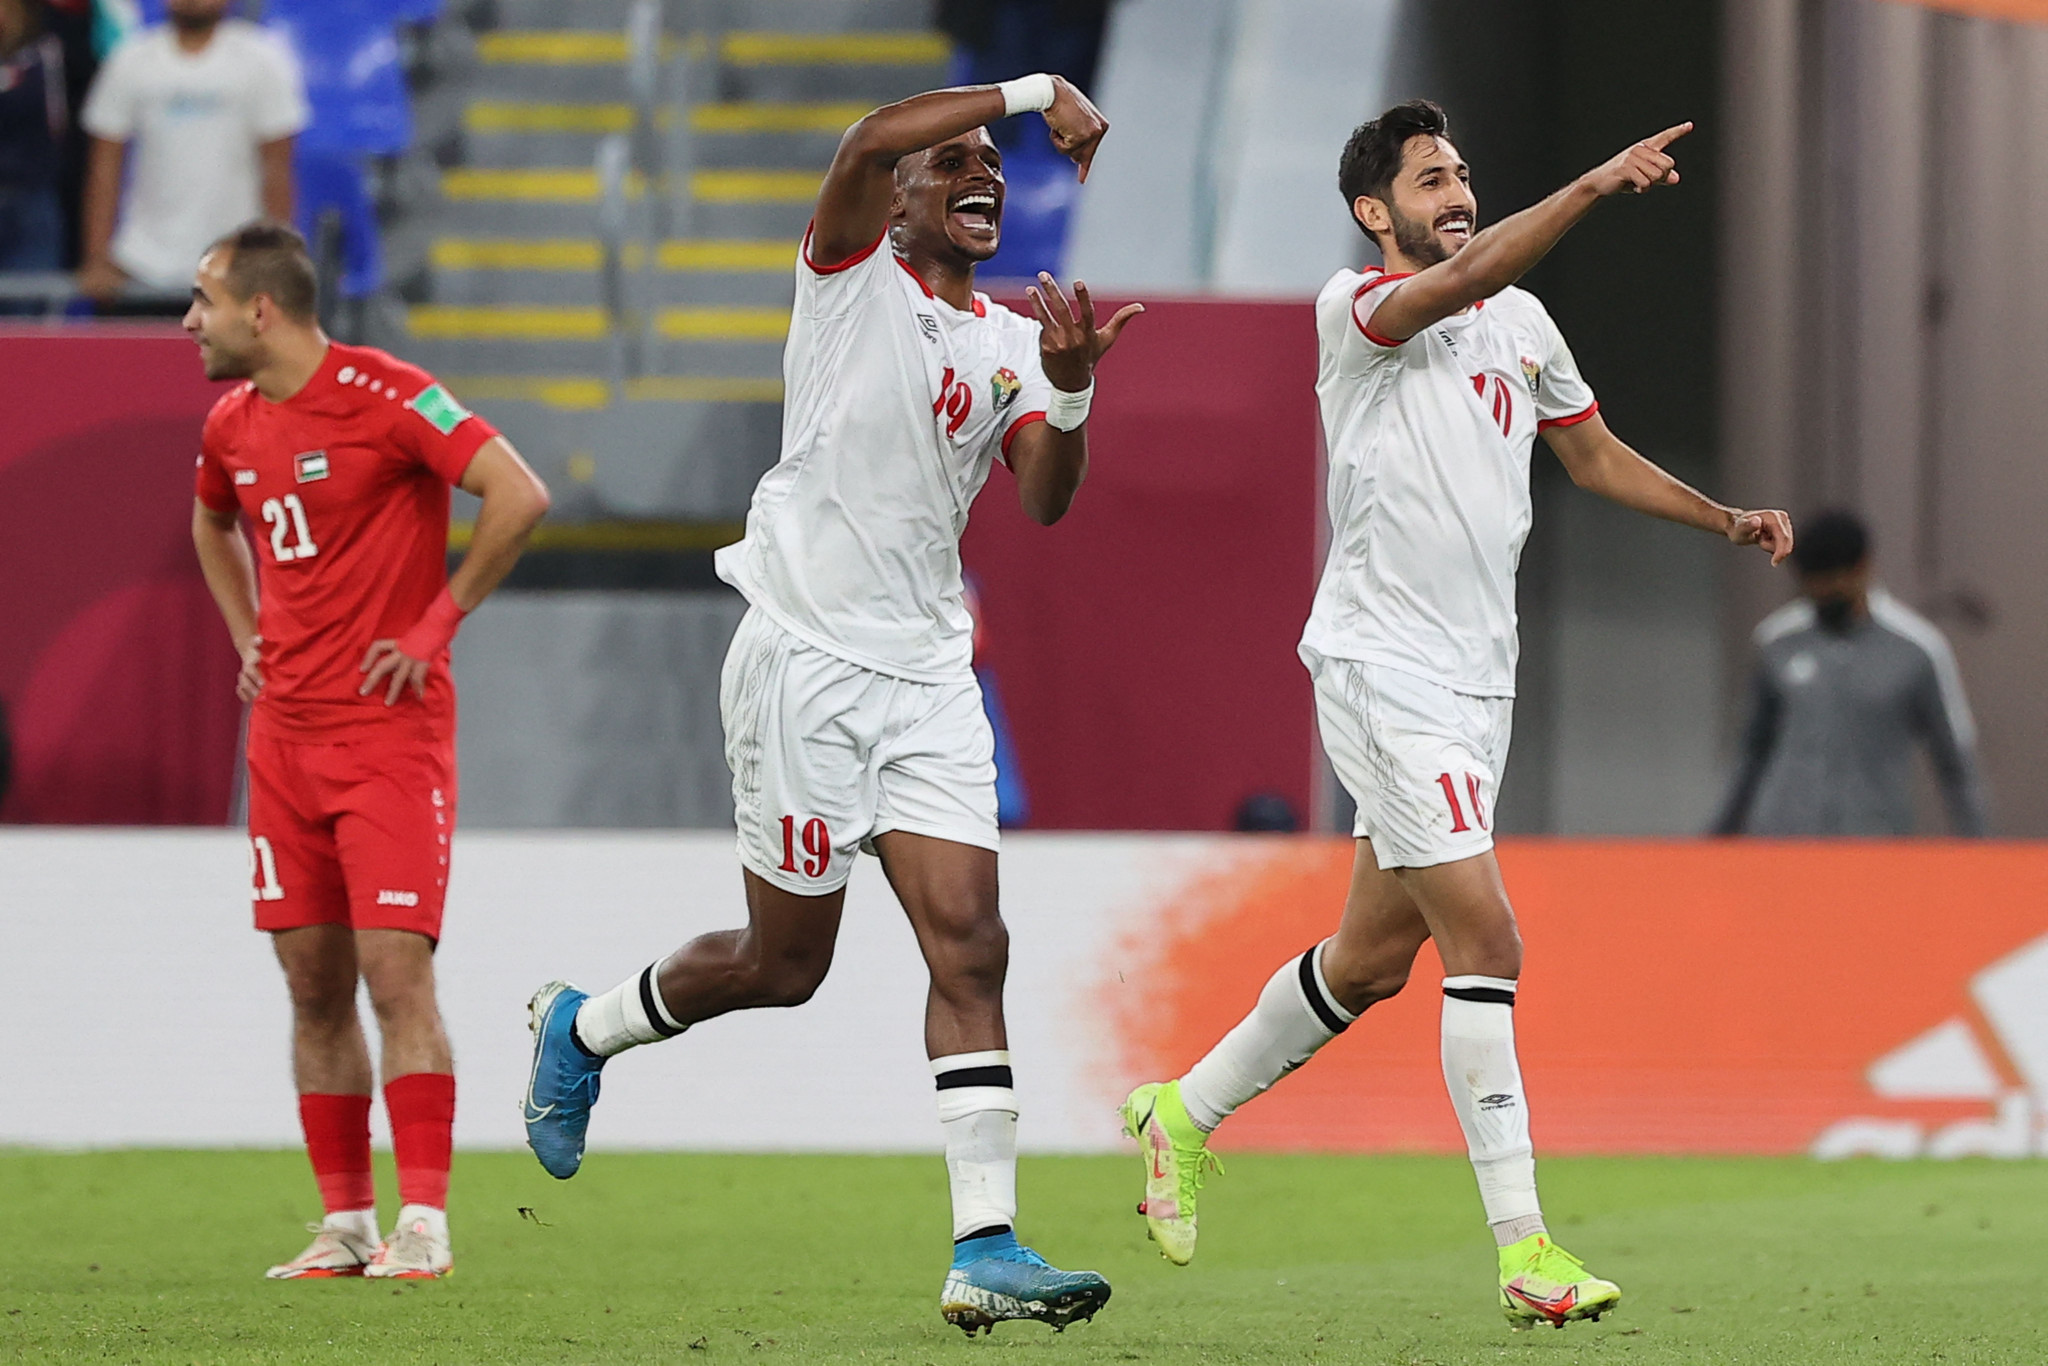 Jordan overcame Palestine to secure a quarter-final spot ©Getty Images